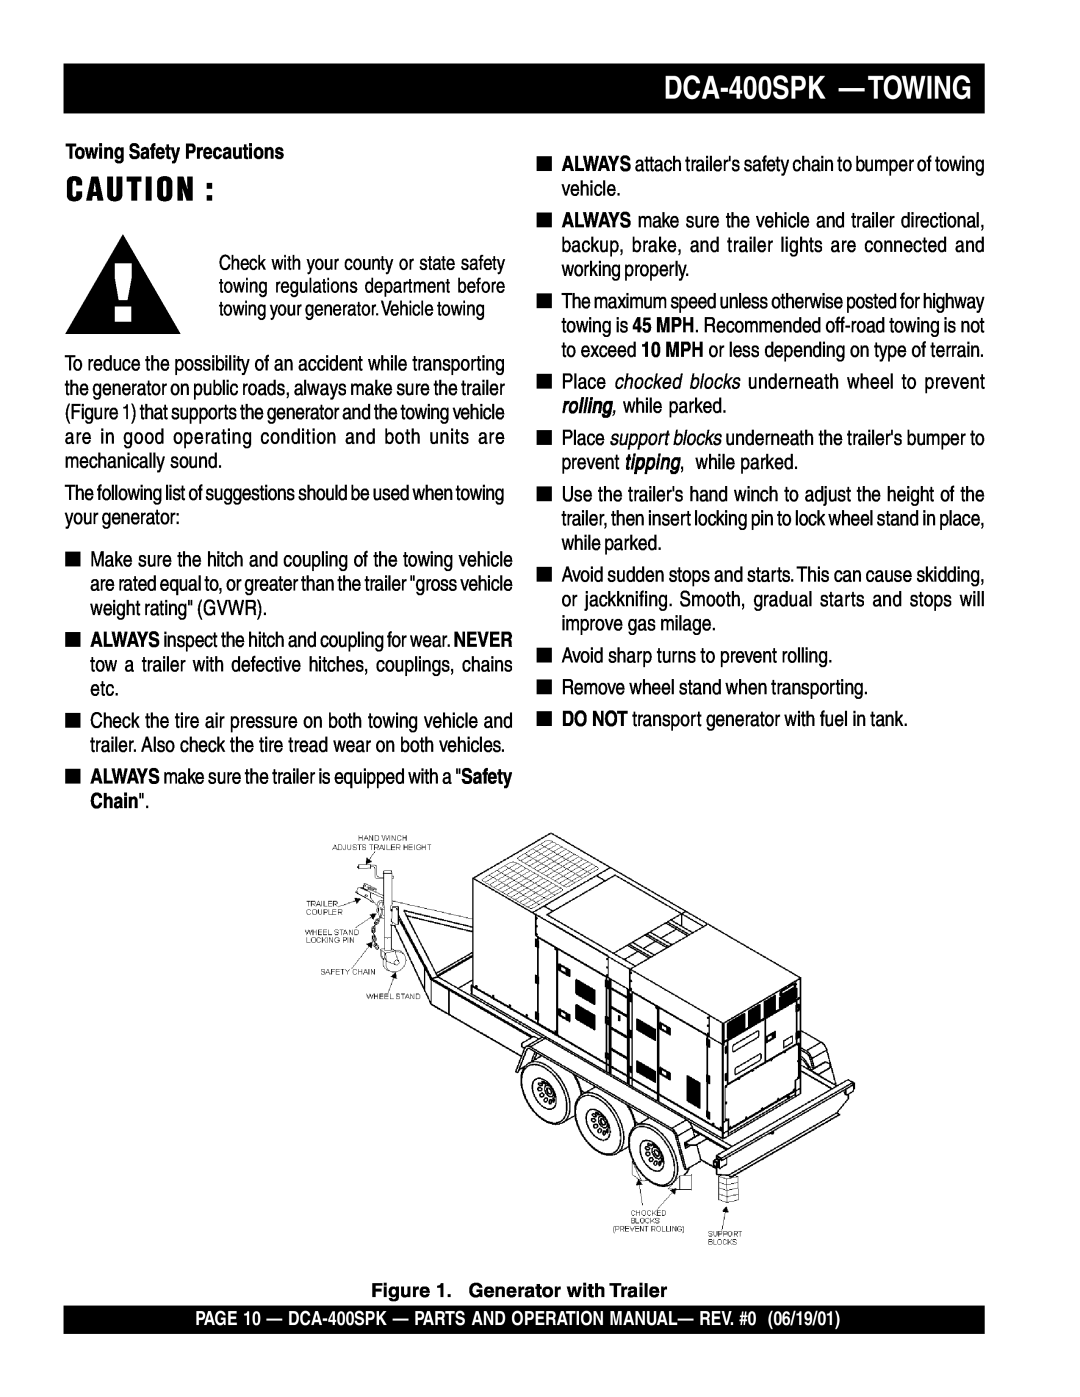 Multiquip operation manual DCA-400SPK —TOWING, Towing Safety Precautions 